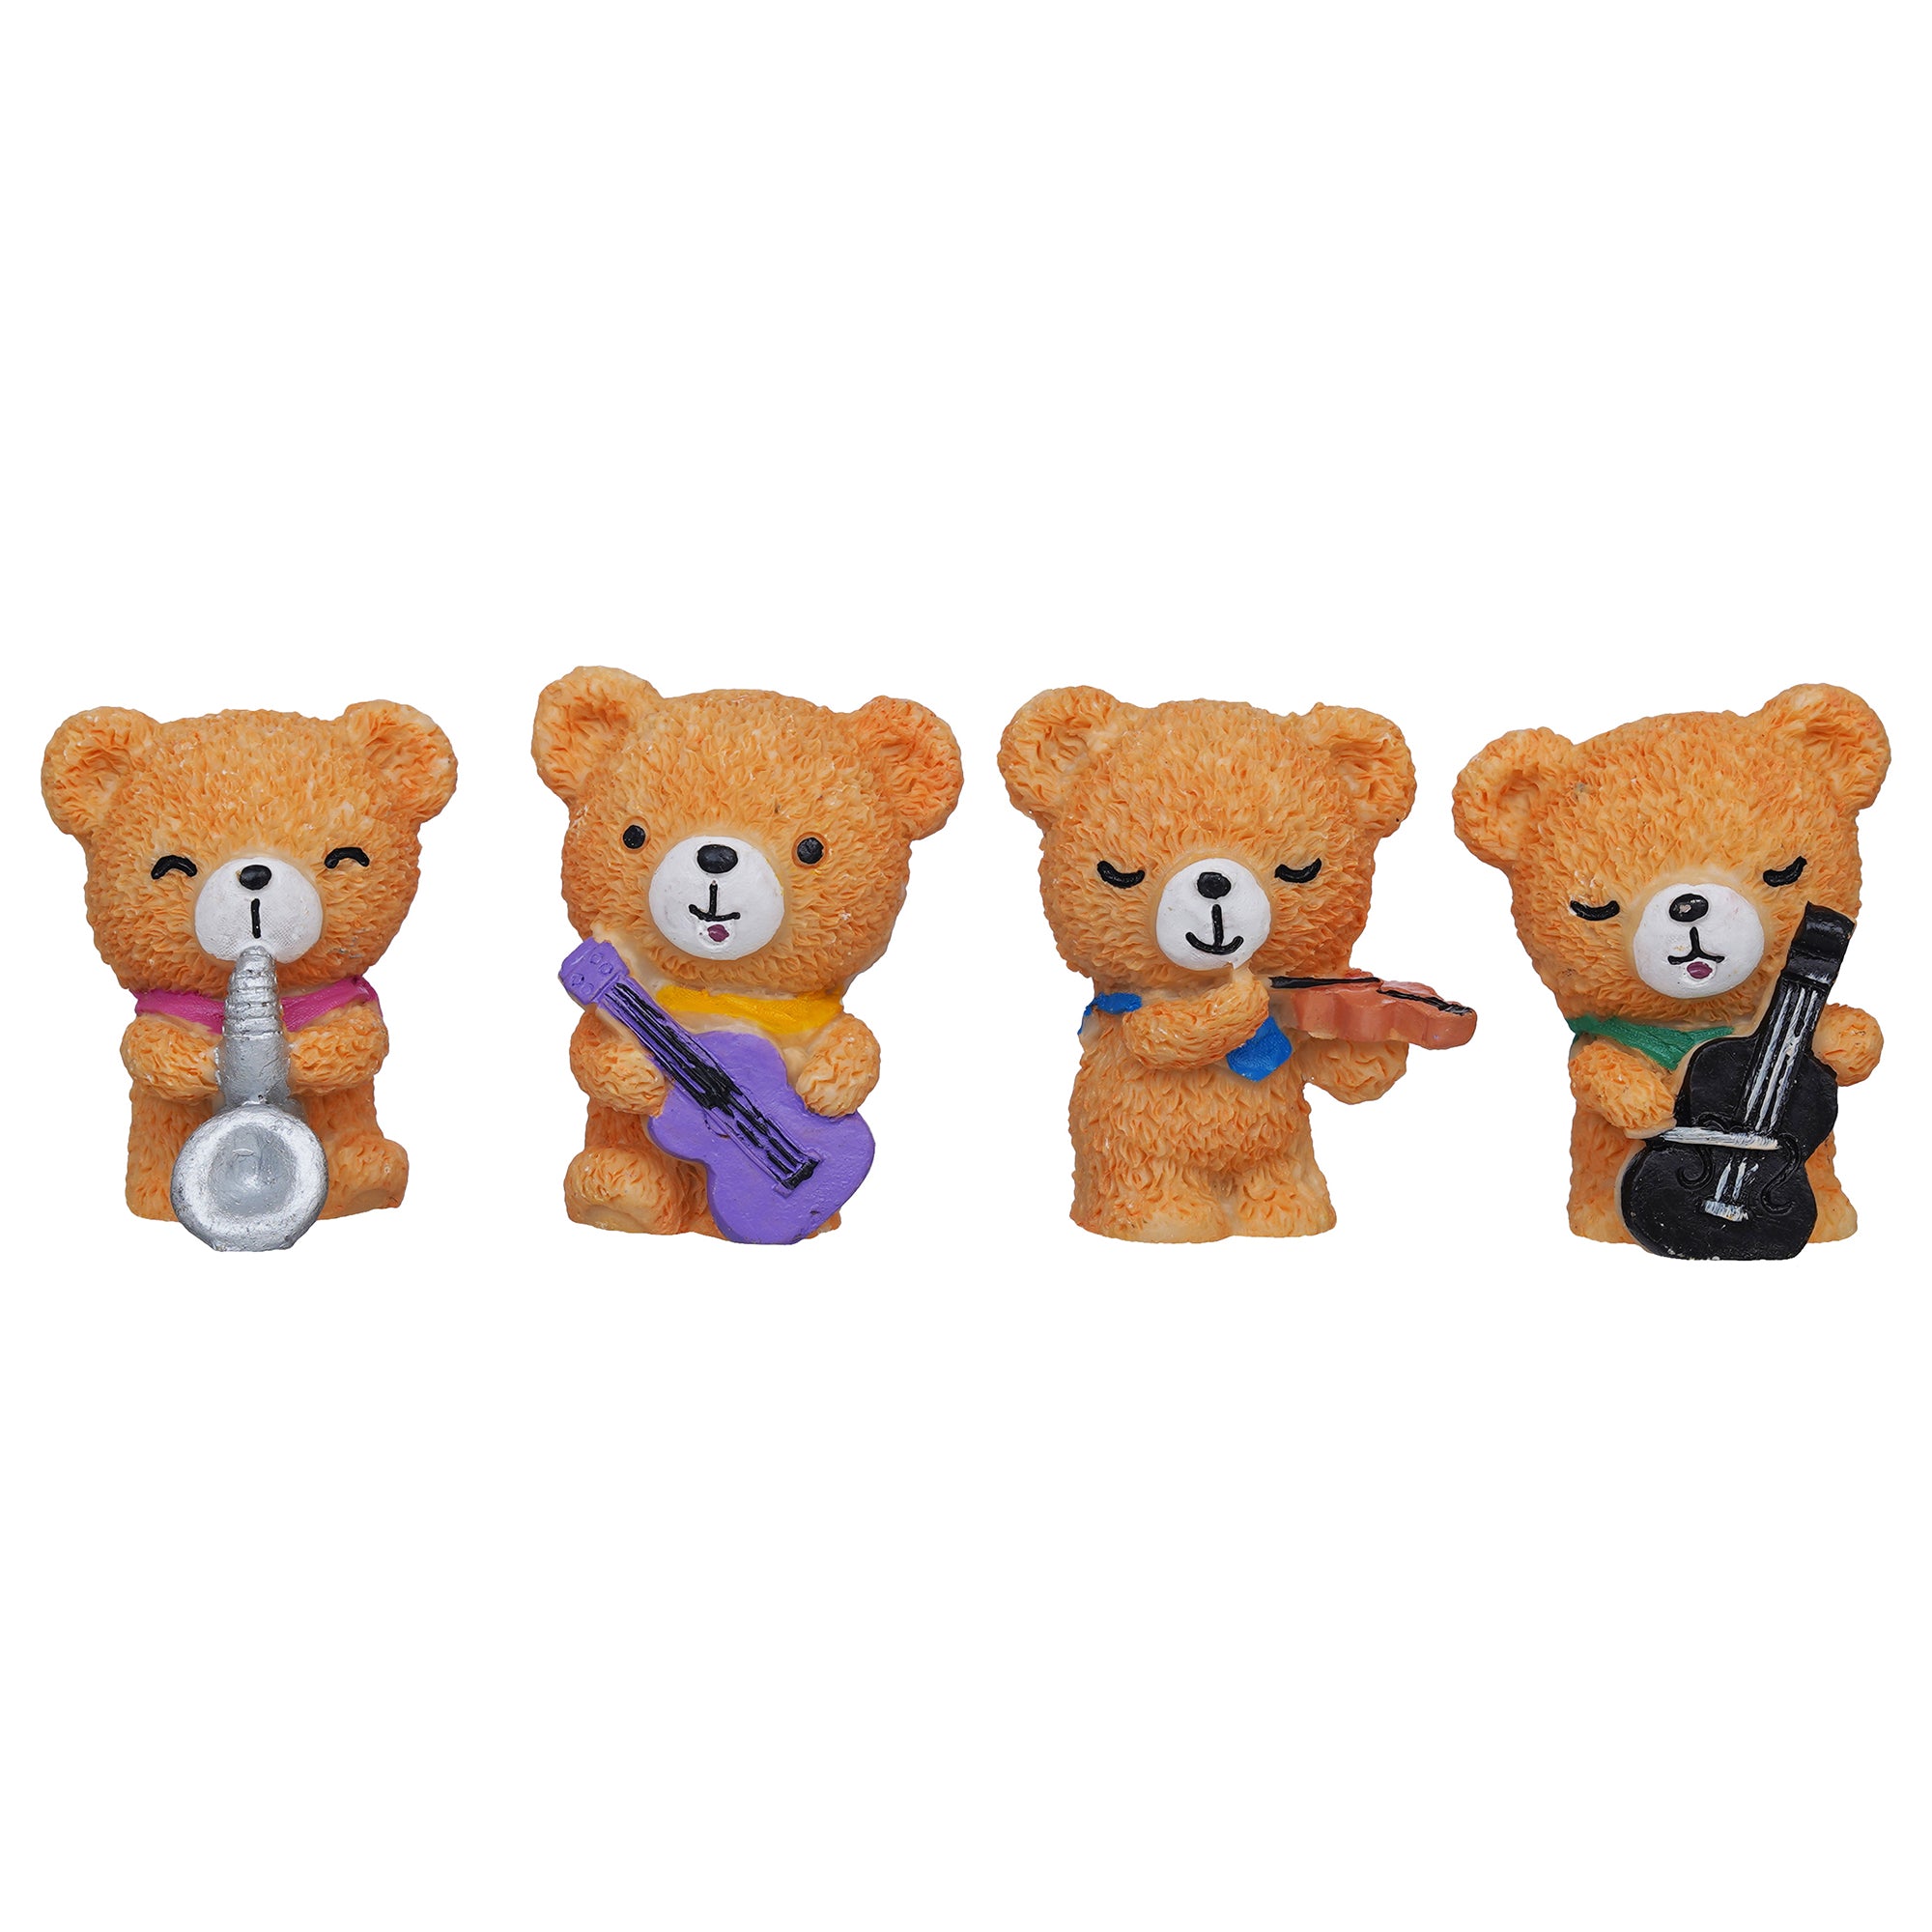 eCraftIndia Set of 4 Cute Teddy Bears Playing Musical Instruments Showpieces 2